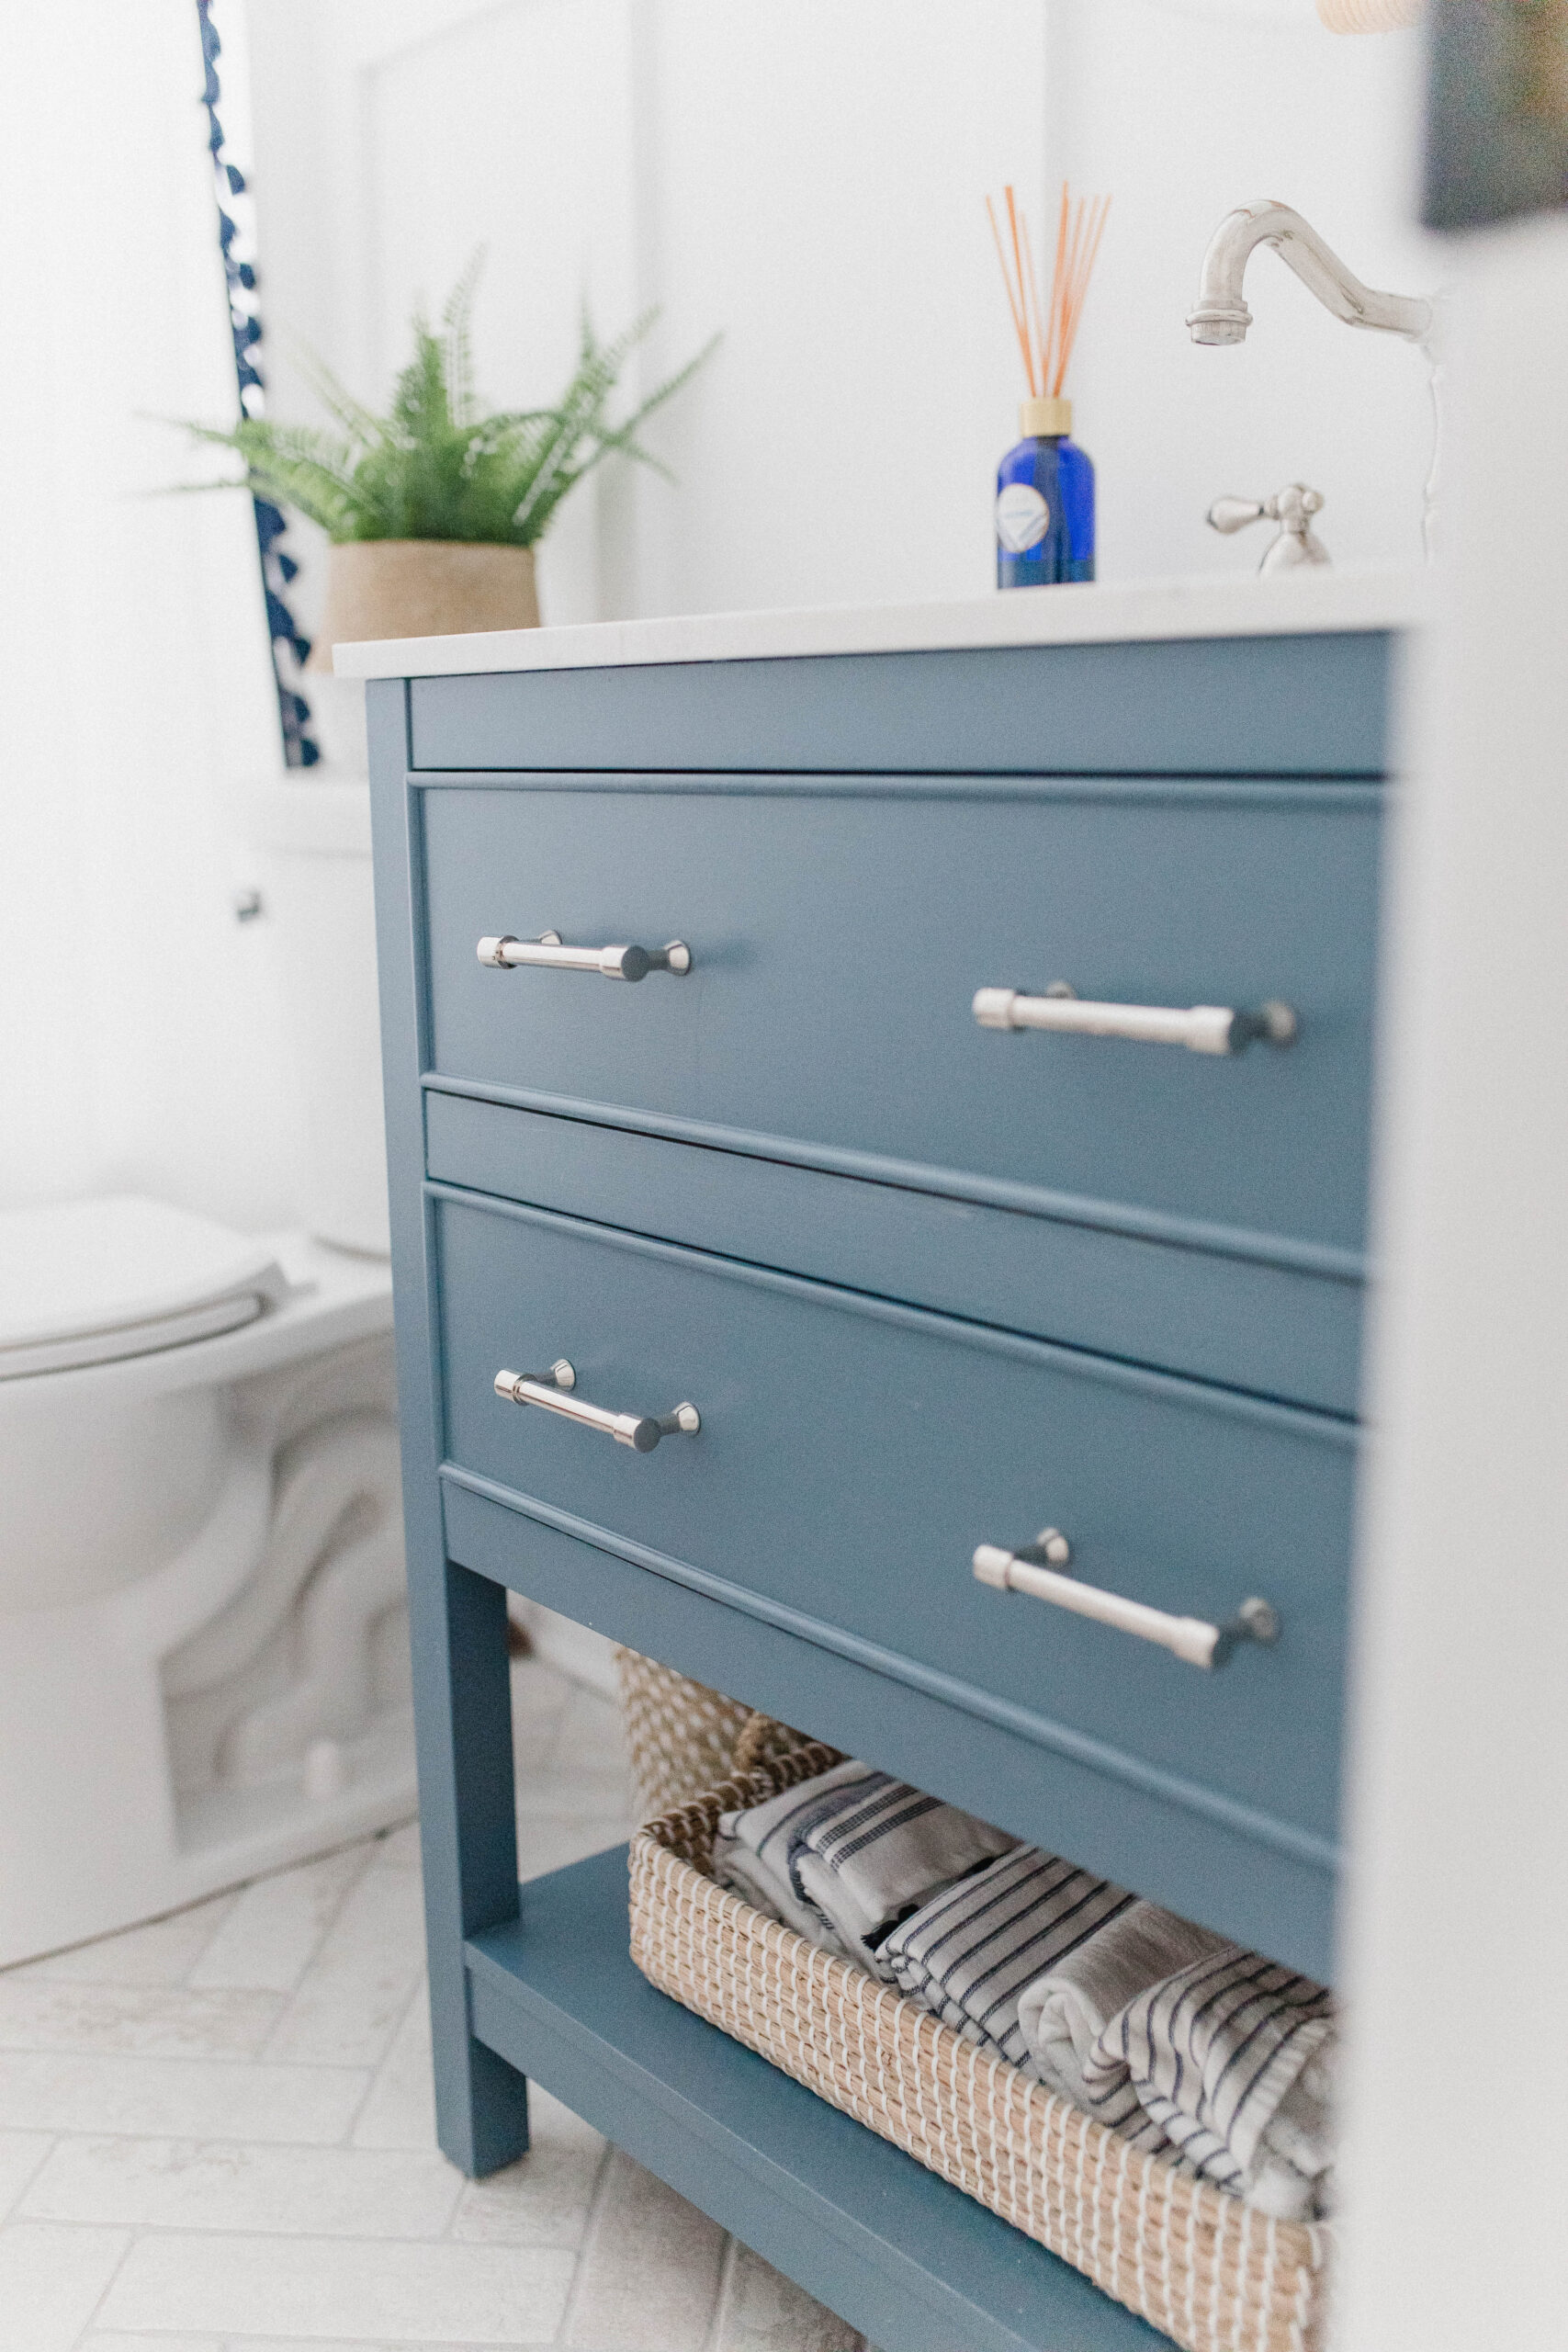 Connecticut life and style blogger Lauren McBride shares her coastal bathroom update, featuring accessories from Serena & Lily.